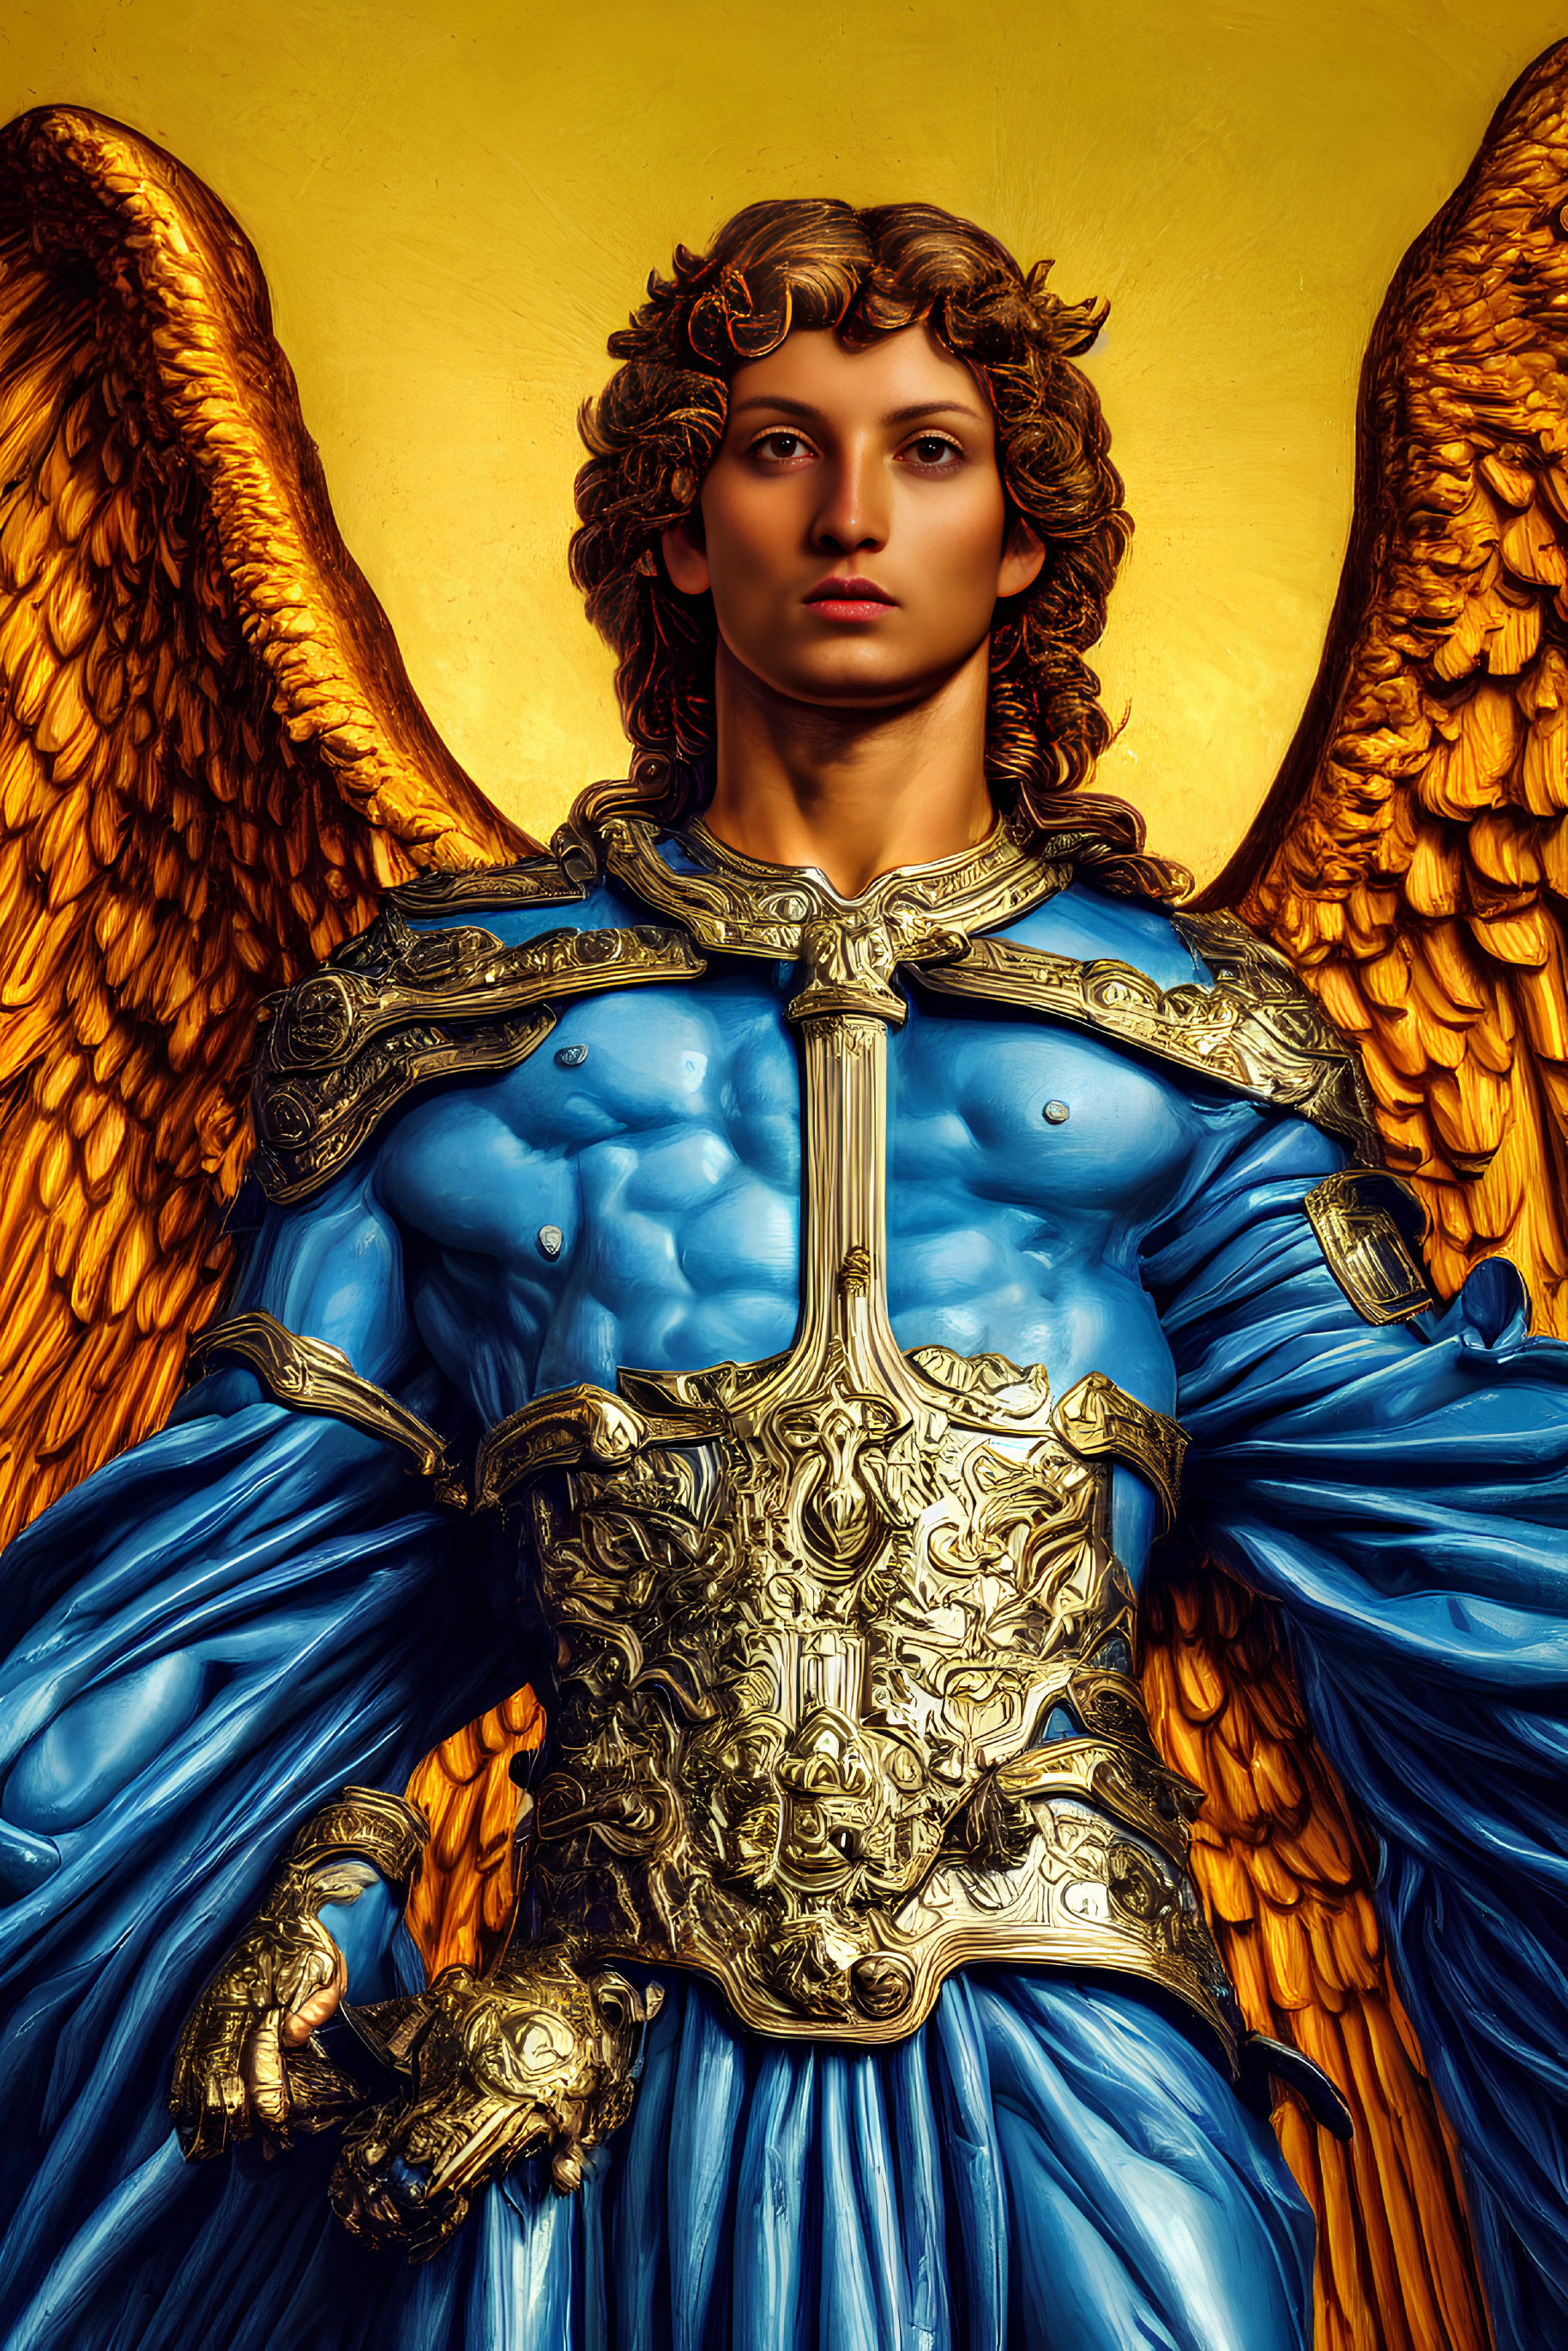 Angel in Blue Armor with Gold Accents Holding Sword on Yellow Background